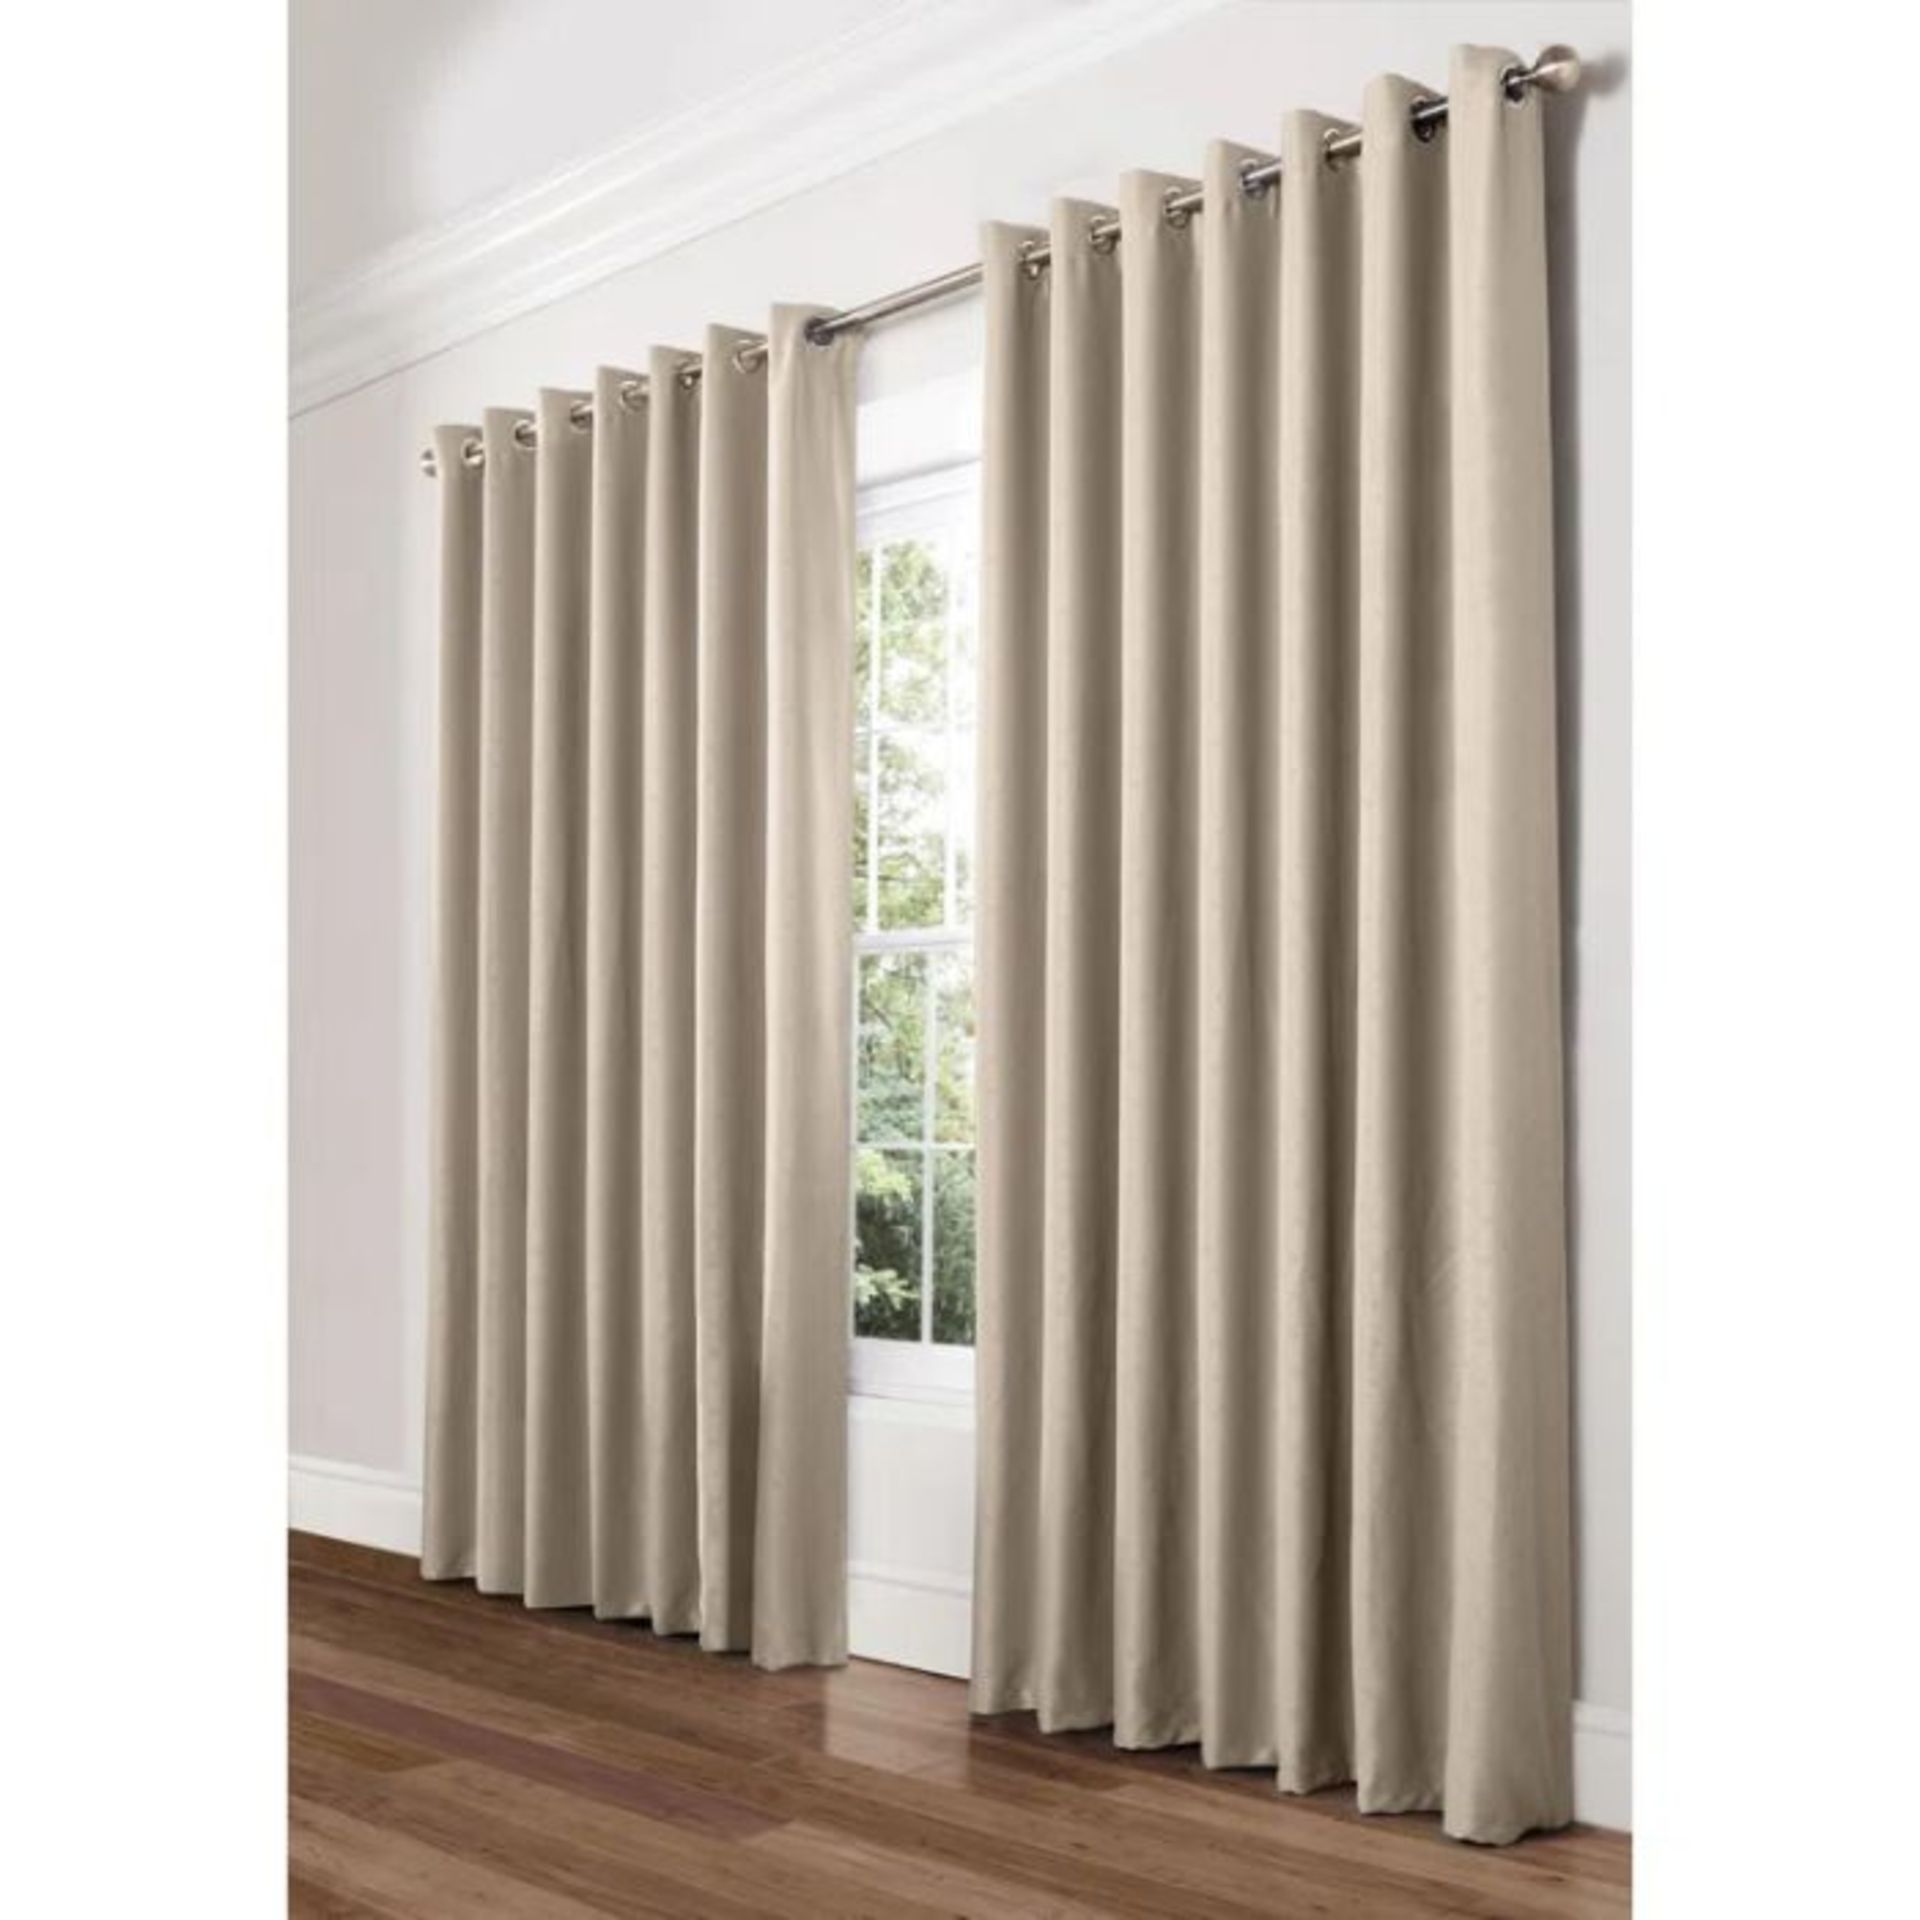 Ebern Designs, Frodine Thermal Blackout Curtain (CREAM) (229 W x 183 D cm) - RRP£46.59(HFFA1042 - - Image 3 of 4